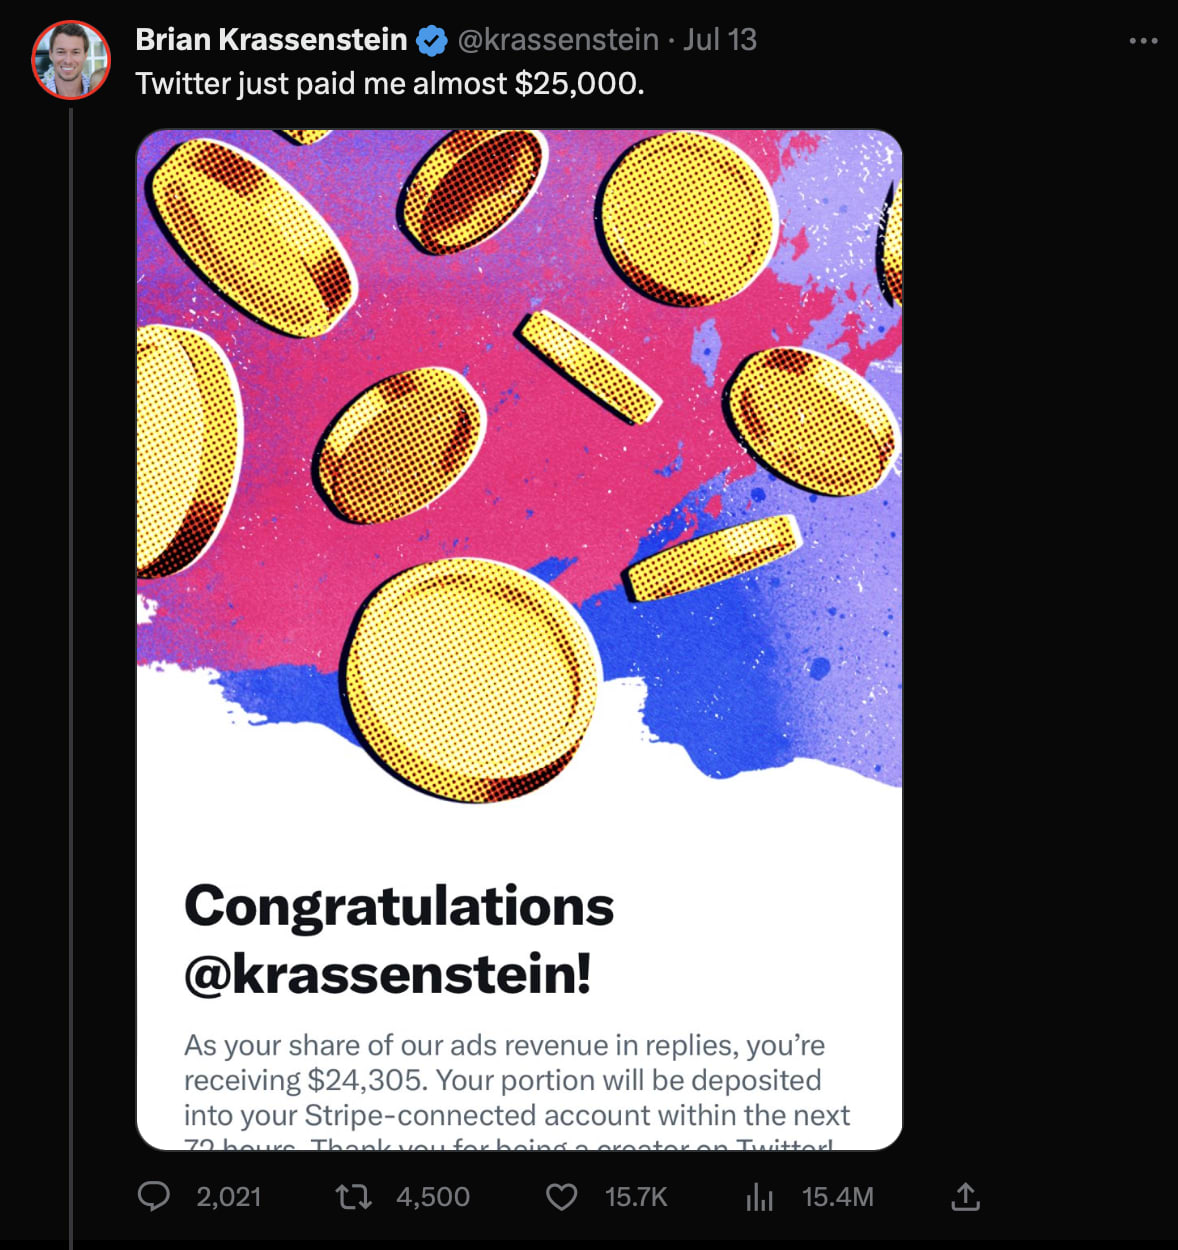 Twitter post, someone getting paid through ads revenue